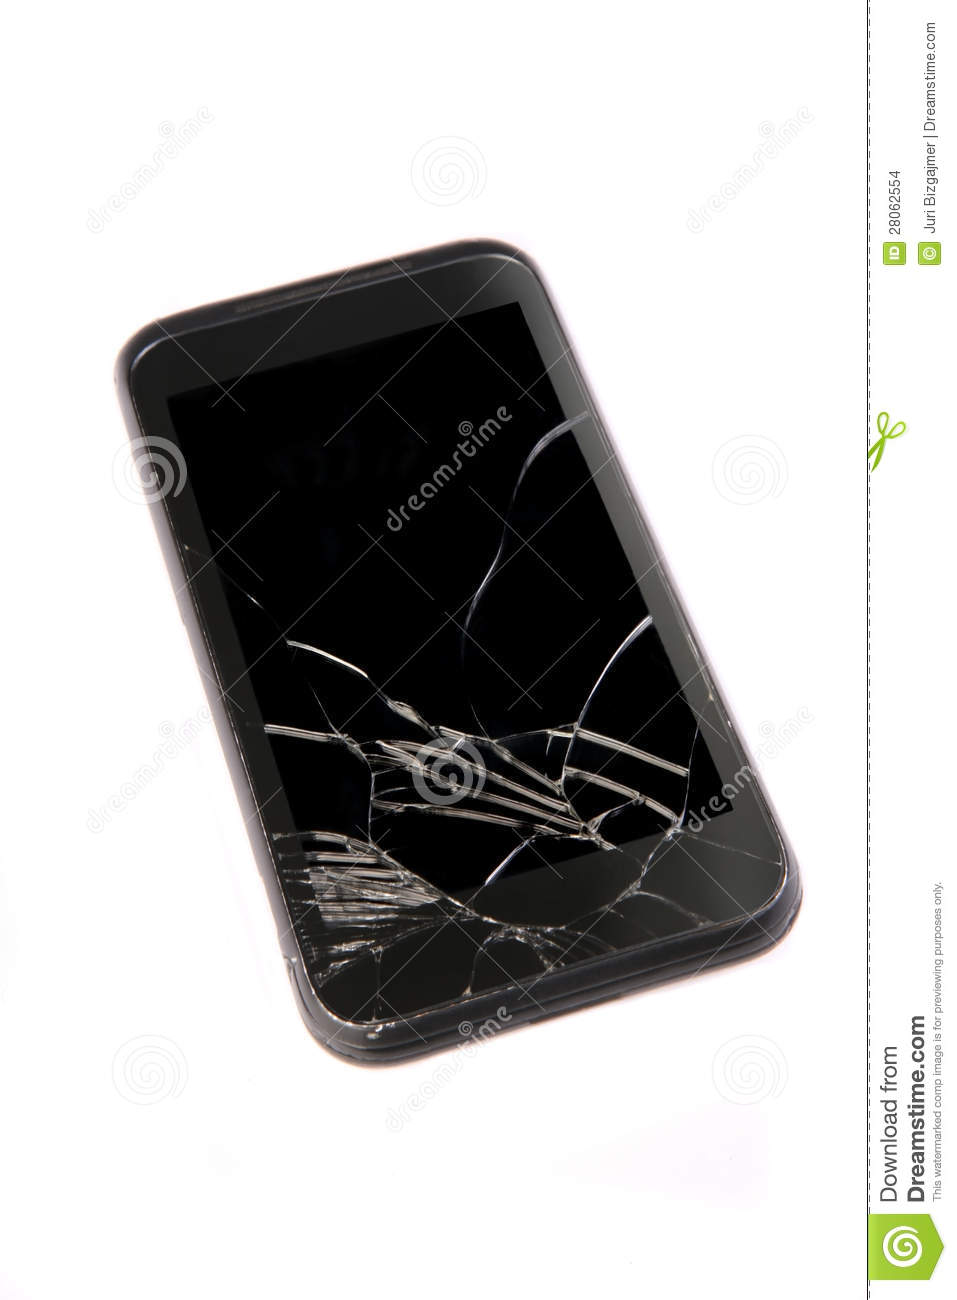 Mobile Phone With The Broken Display Stock Images   Image  28062554